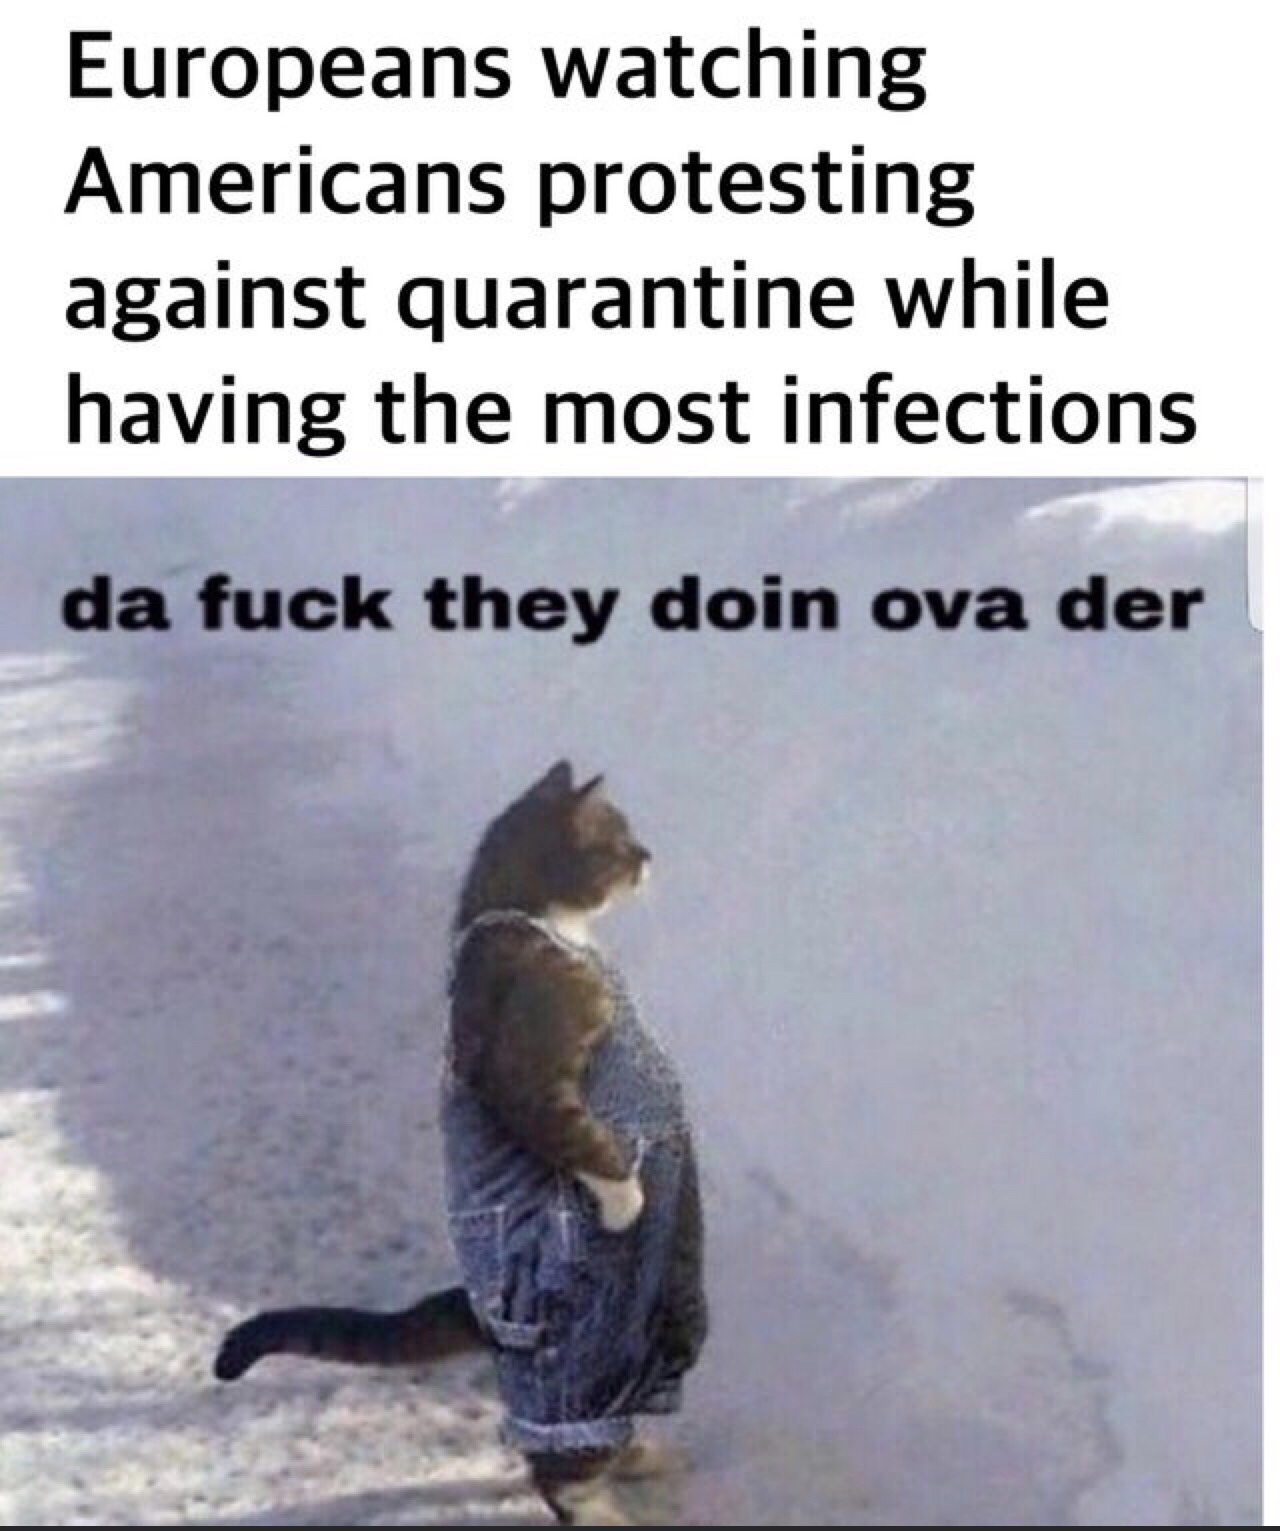 cat in overalls meme - Europeans watching Americans protesting against quarantine while having the most infections da fuck they doin ova der